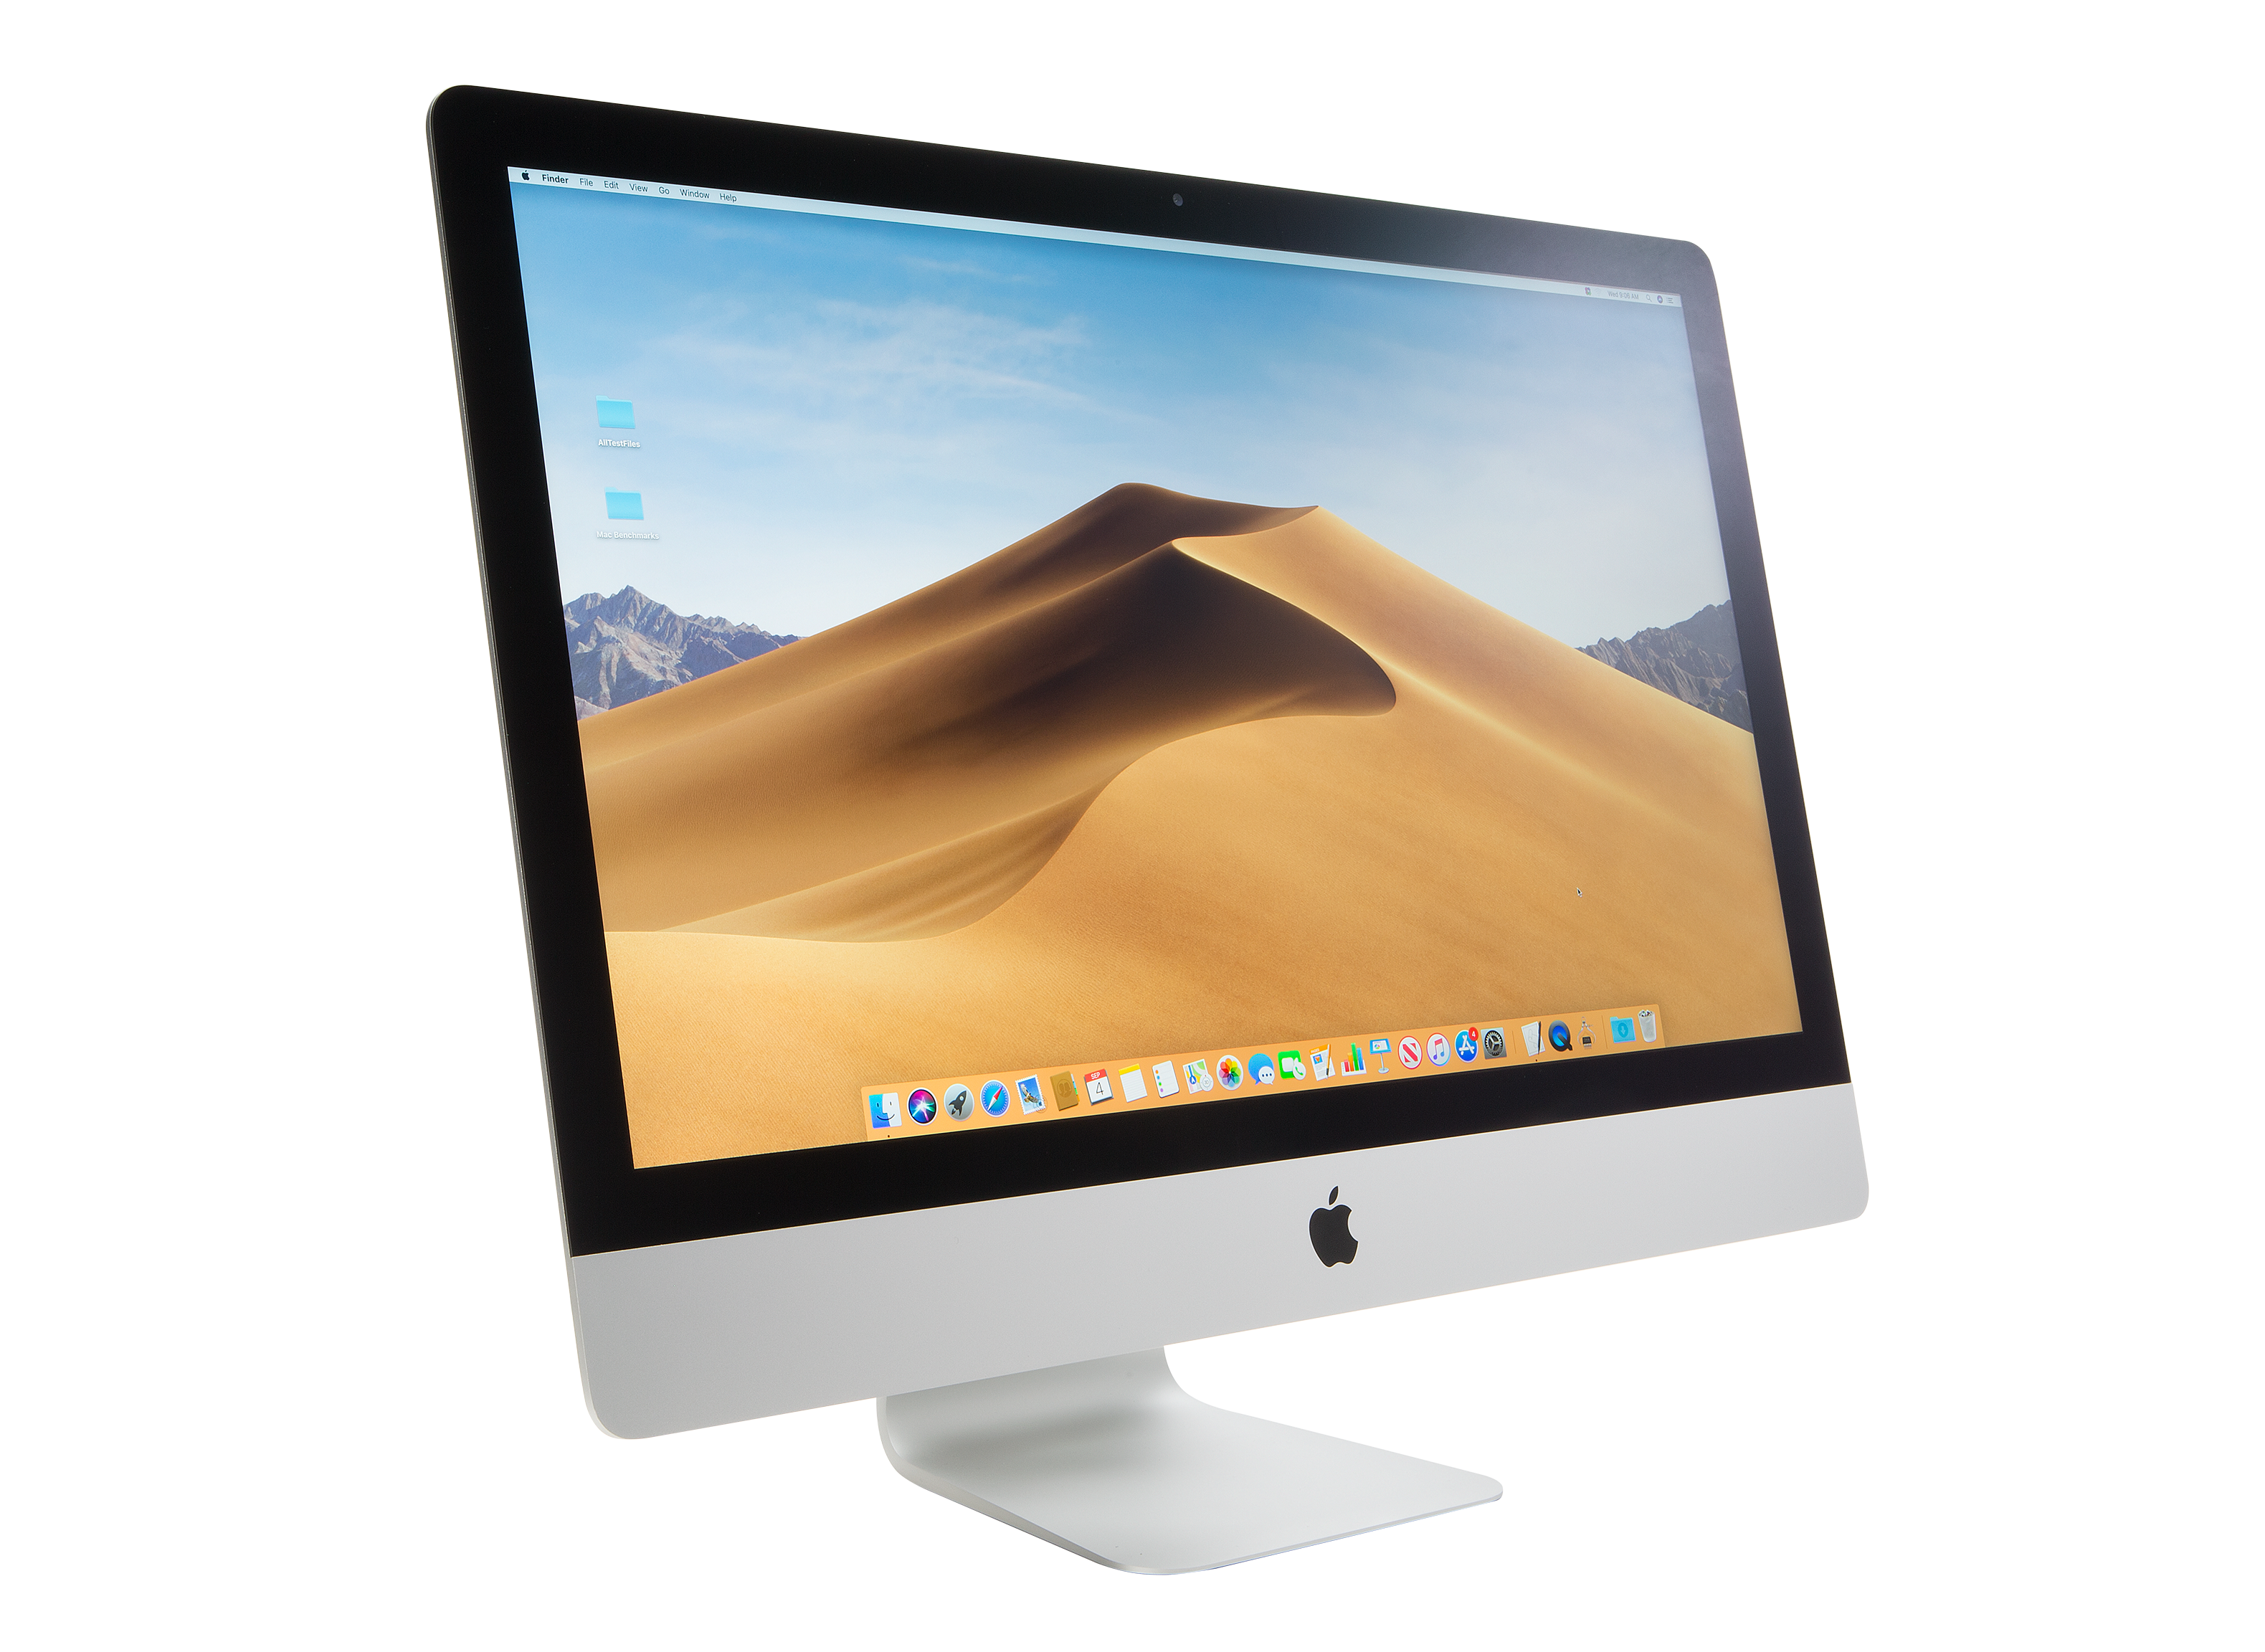 Apple 27-inch iMac 5K Display (2019, MRQY2LL/A) Computer Review 